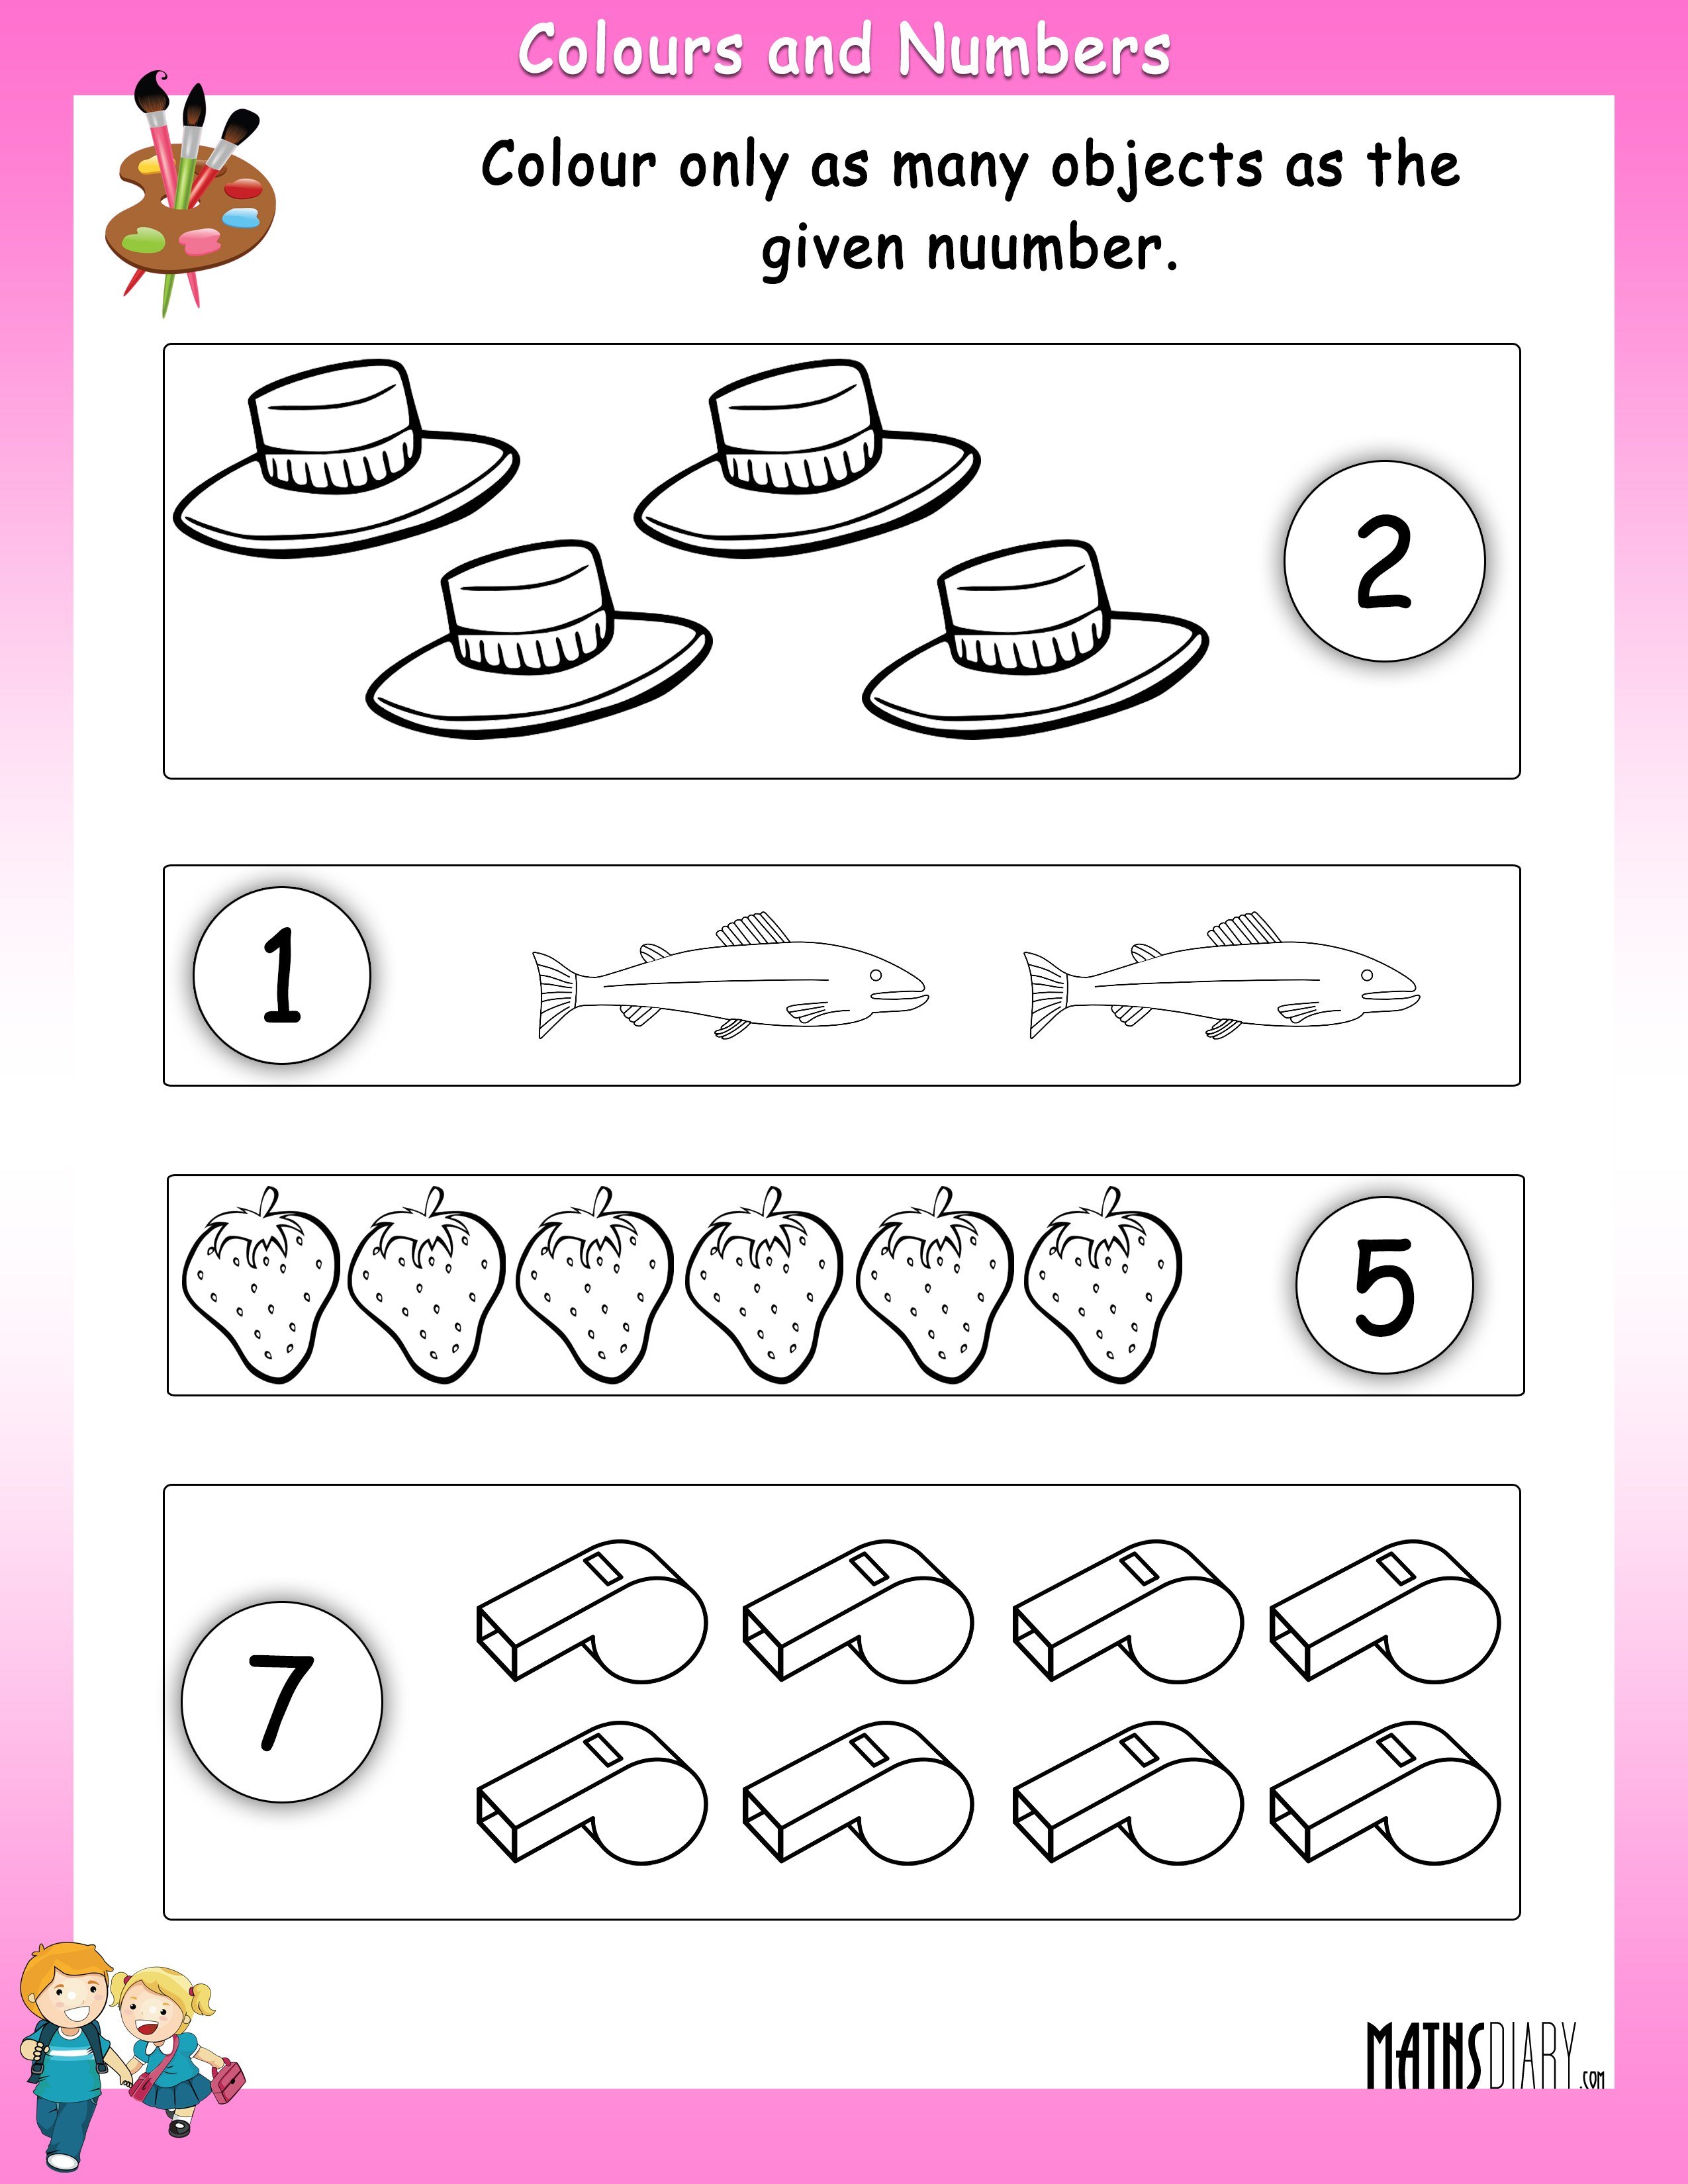 Colours And Numbers Math Worksheets MathsDiary